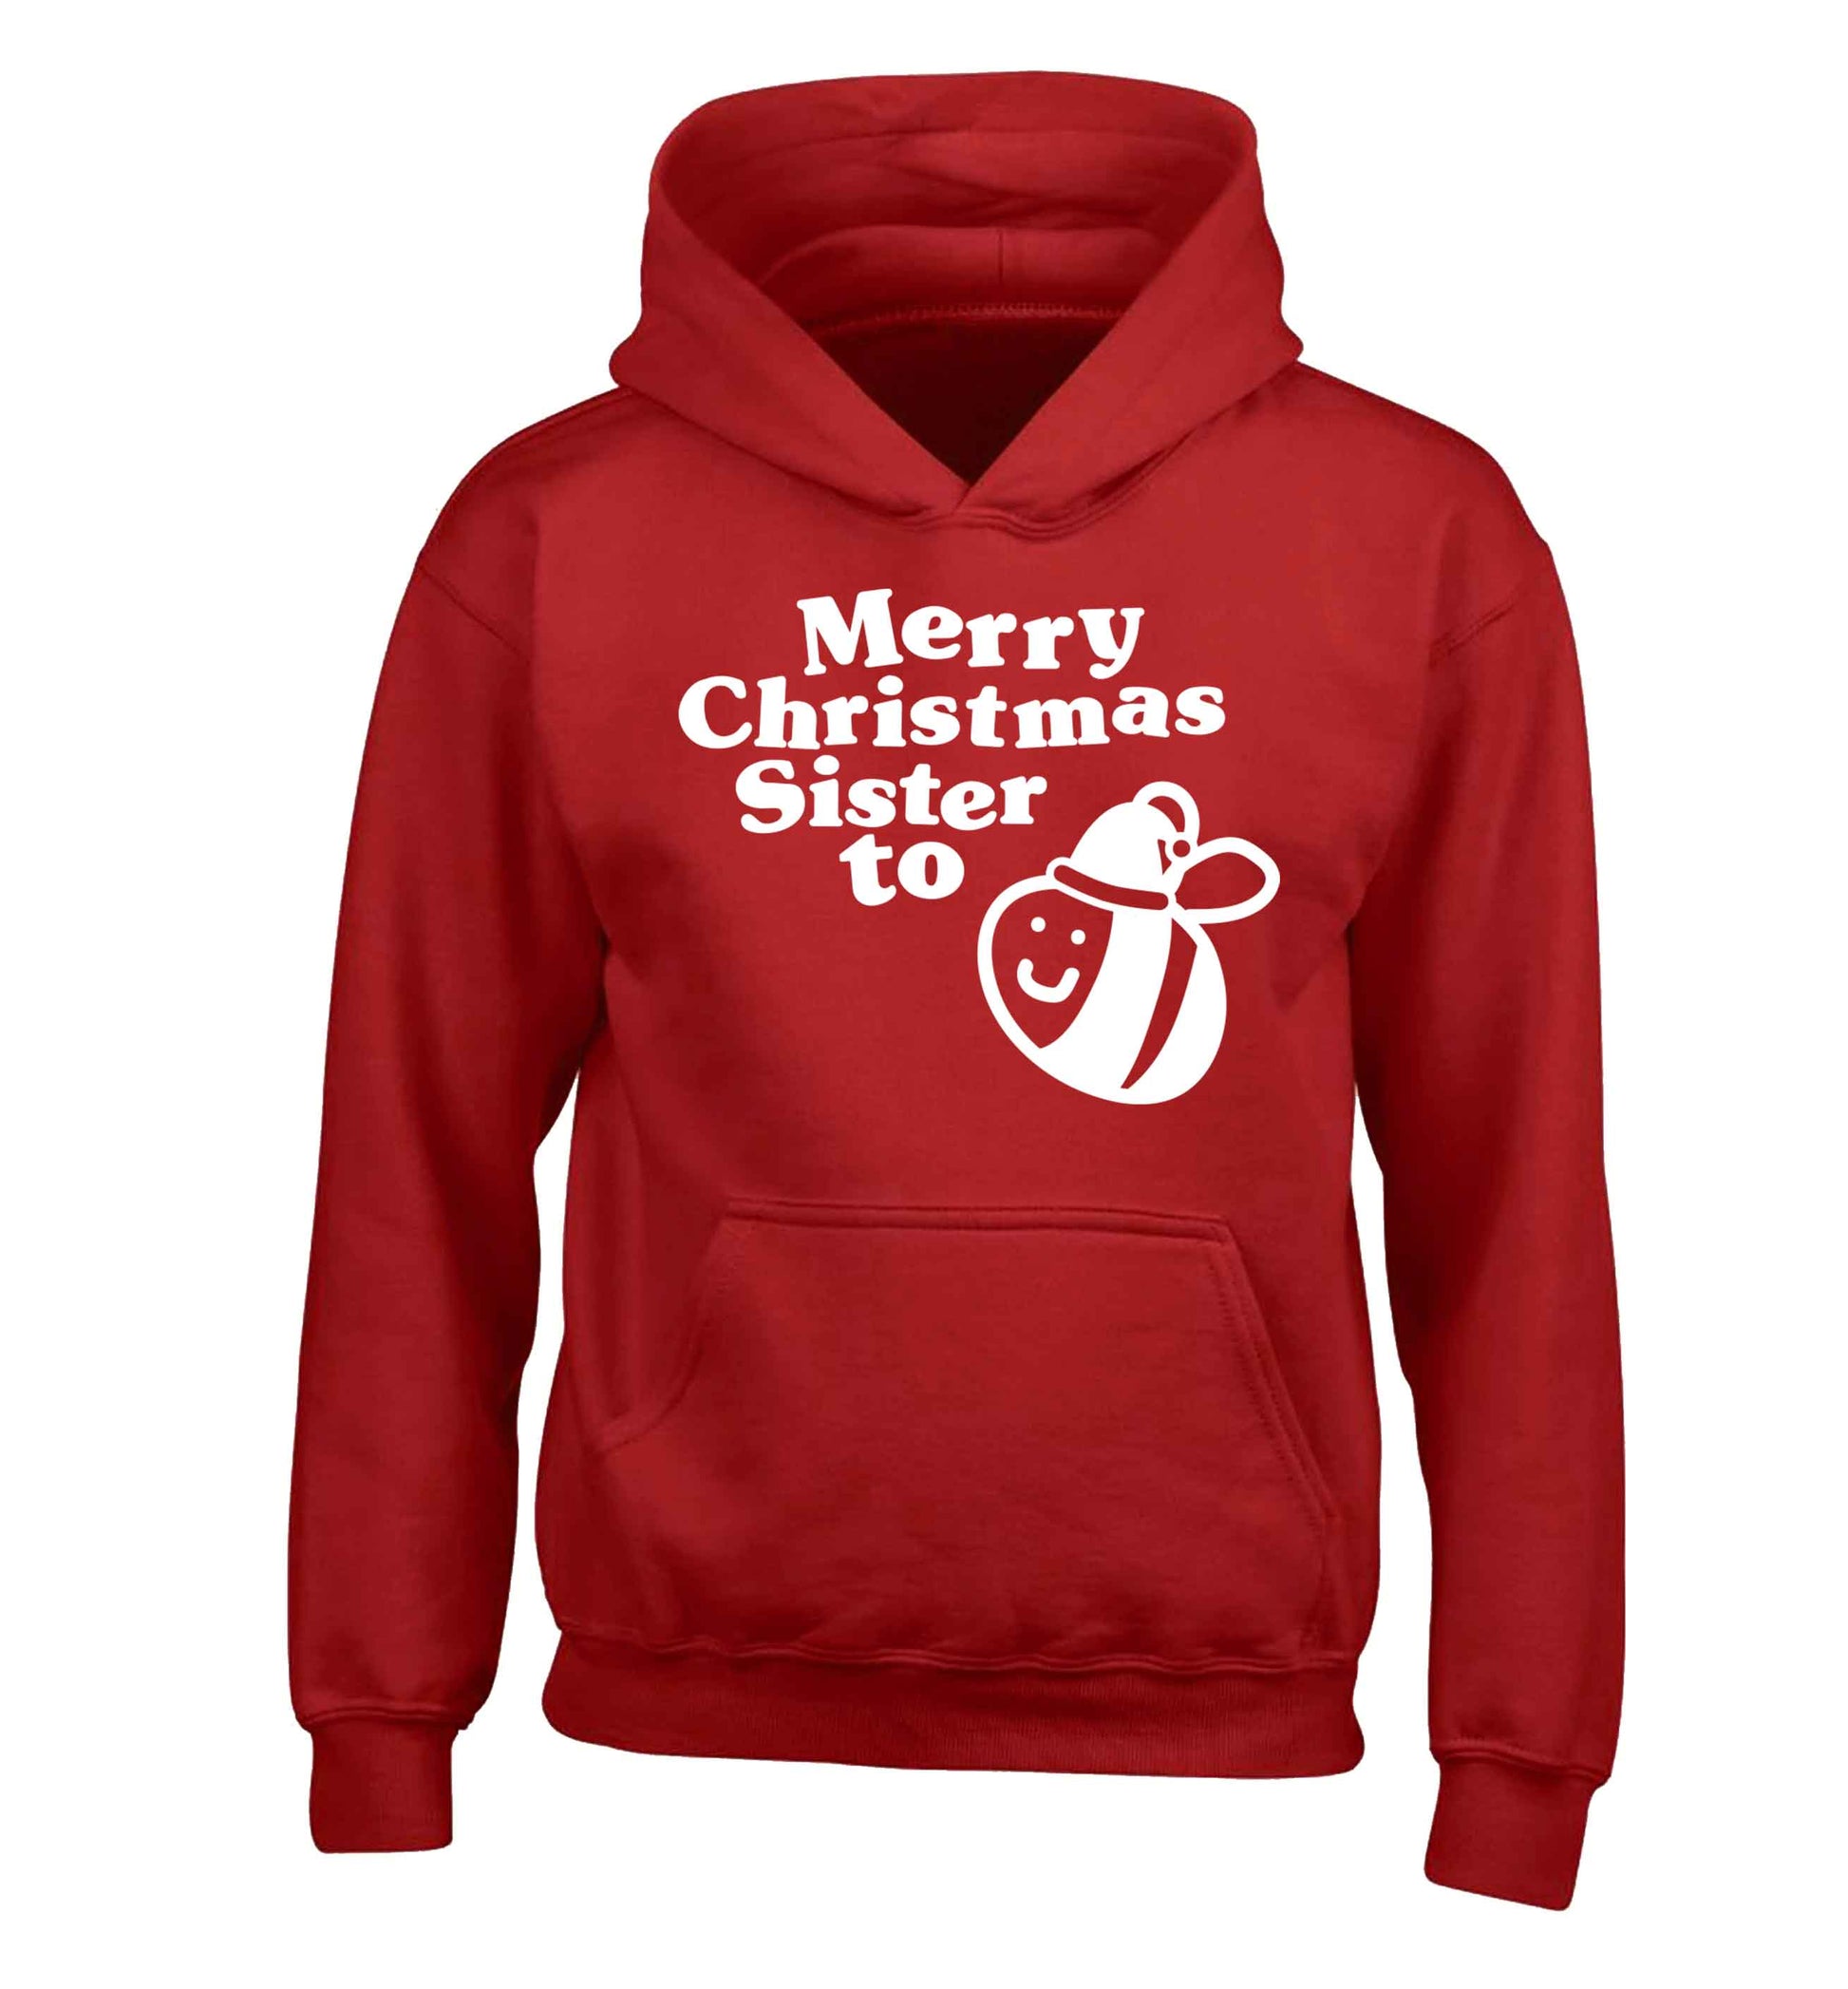 Merry Christmas sister to be children's red hoodie 12-13 Years